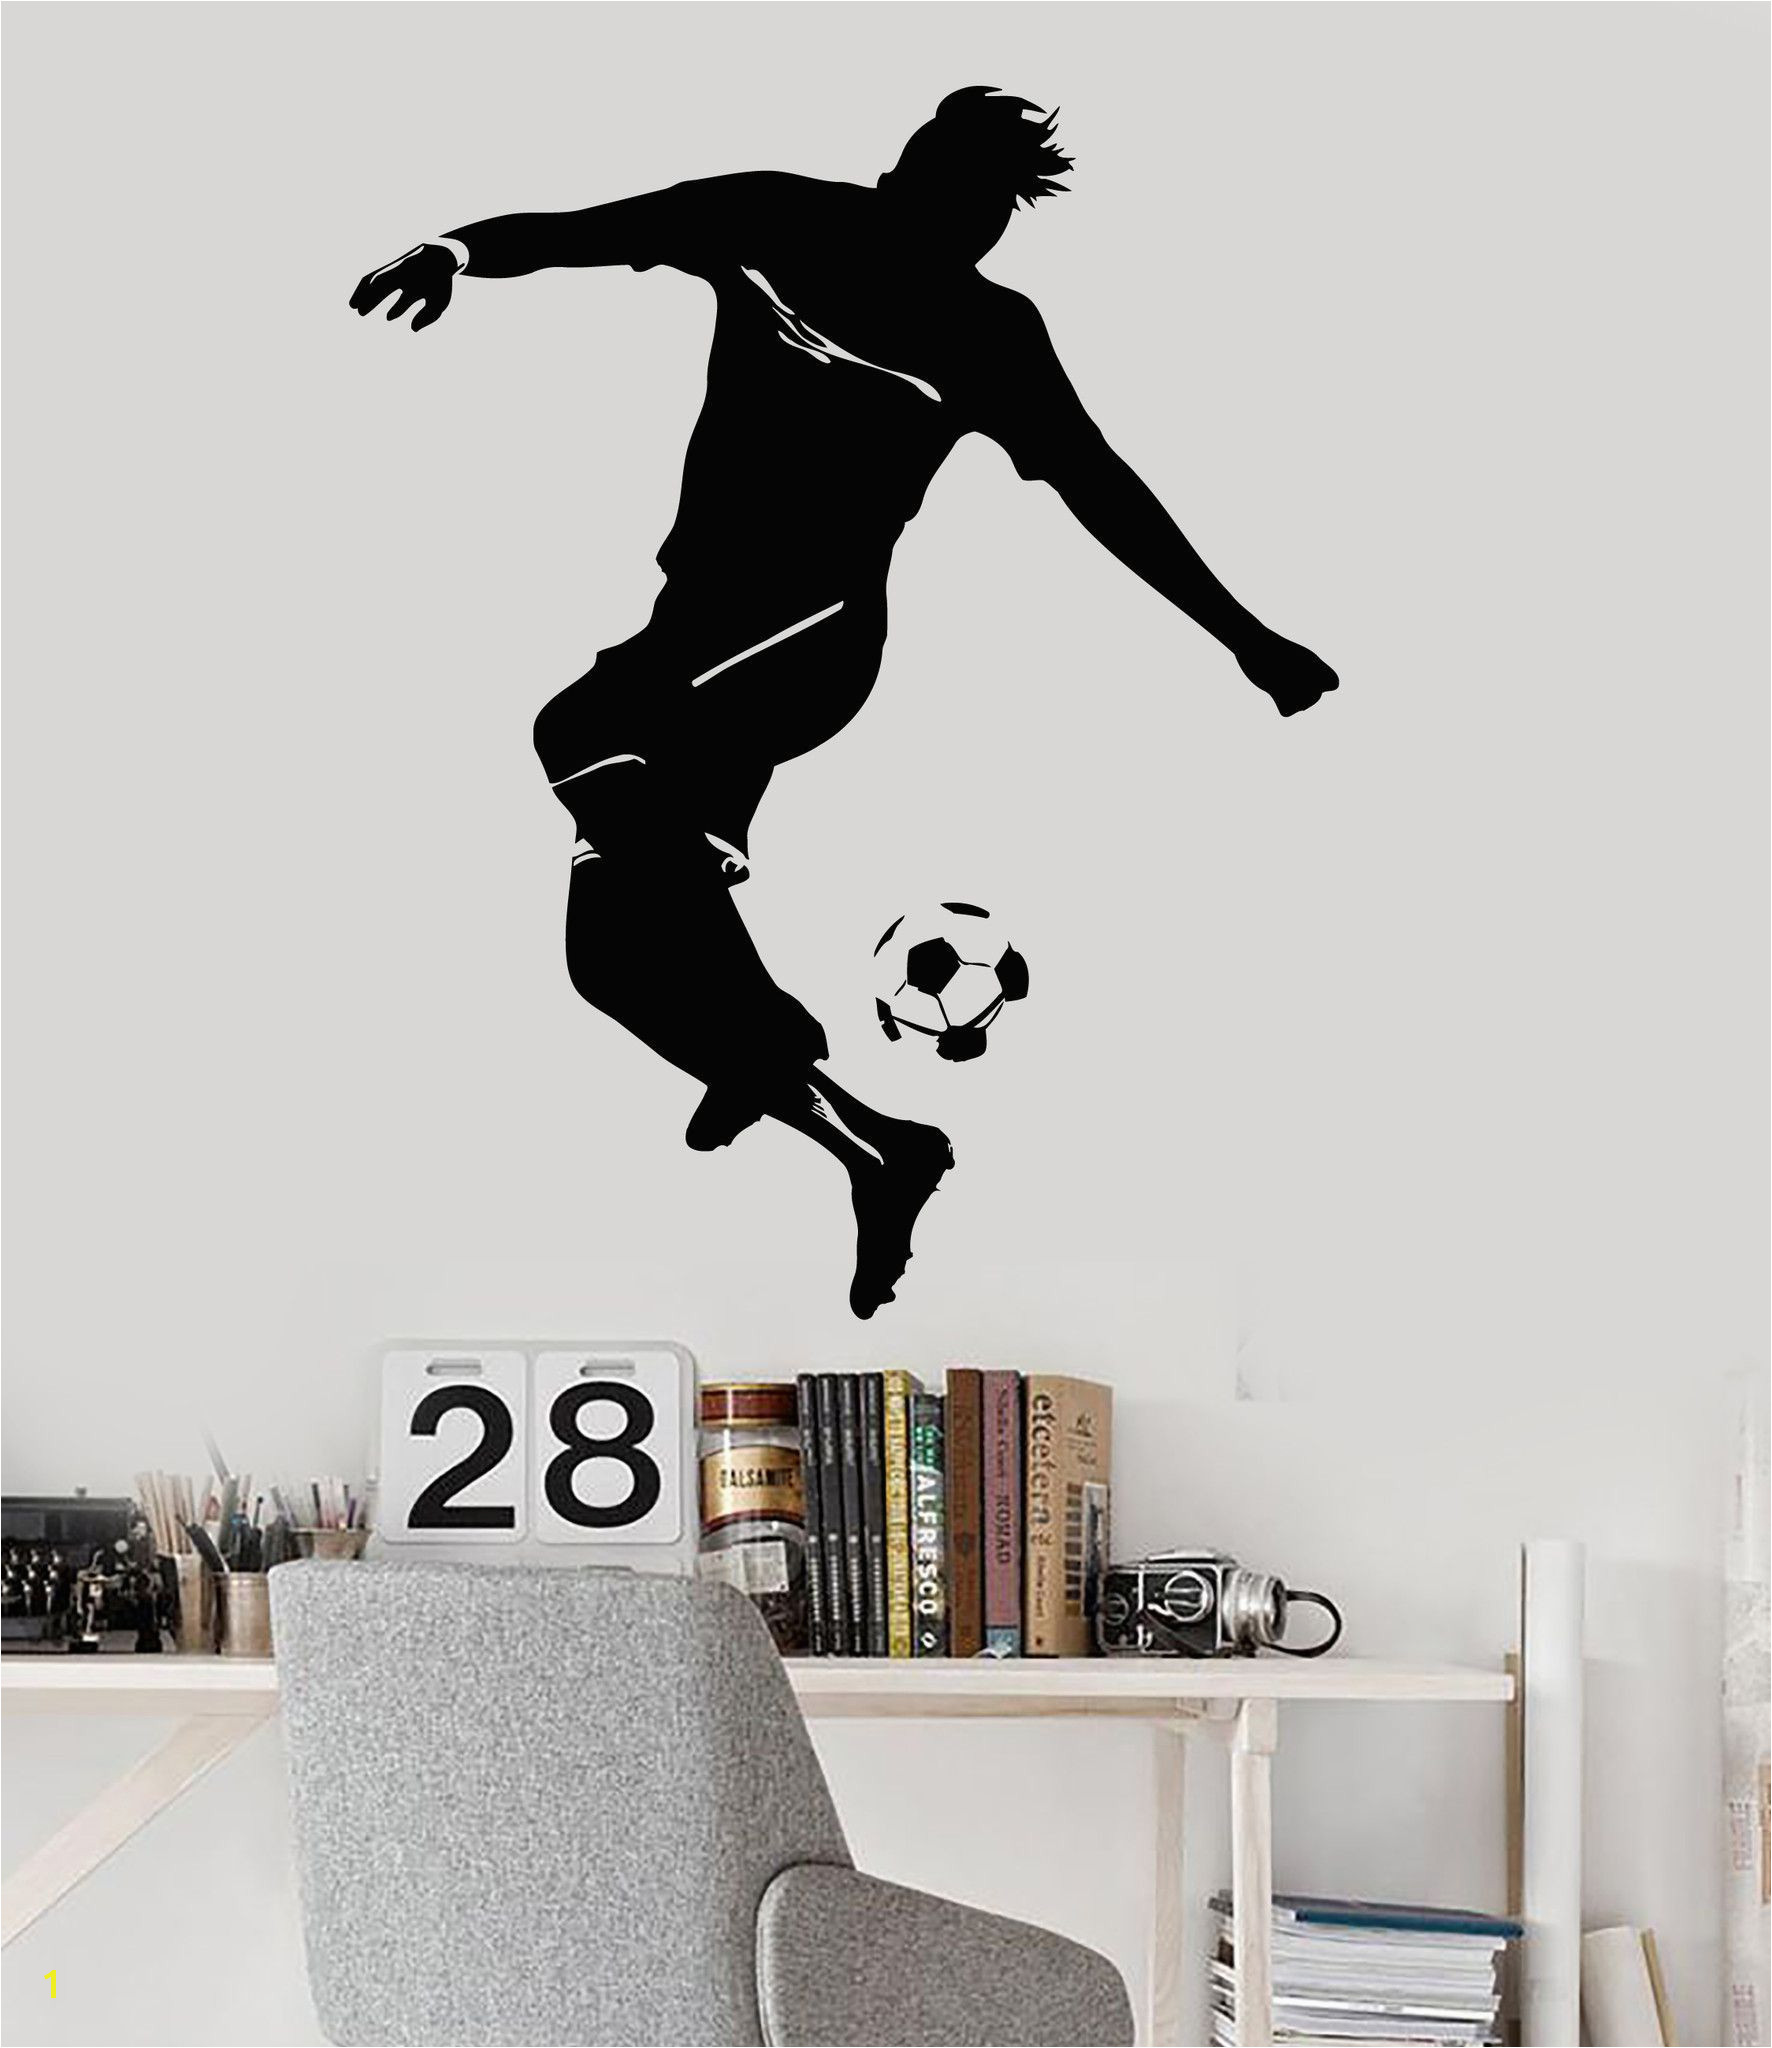 Soccer Murals for Bedrooms Vinyl Wall Decal soccer Player Ball Boys Room Sports Stickers Murals